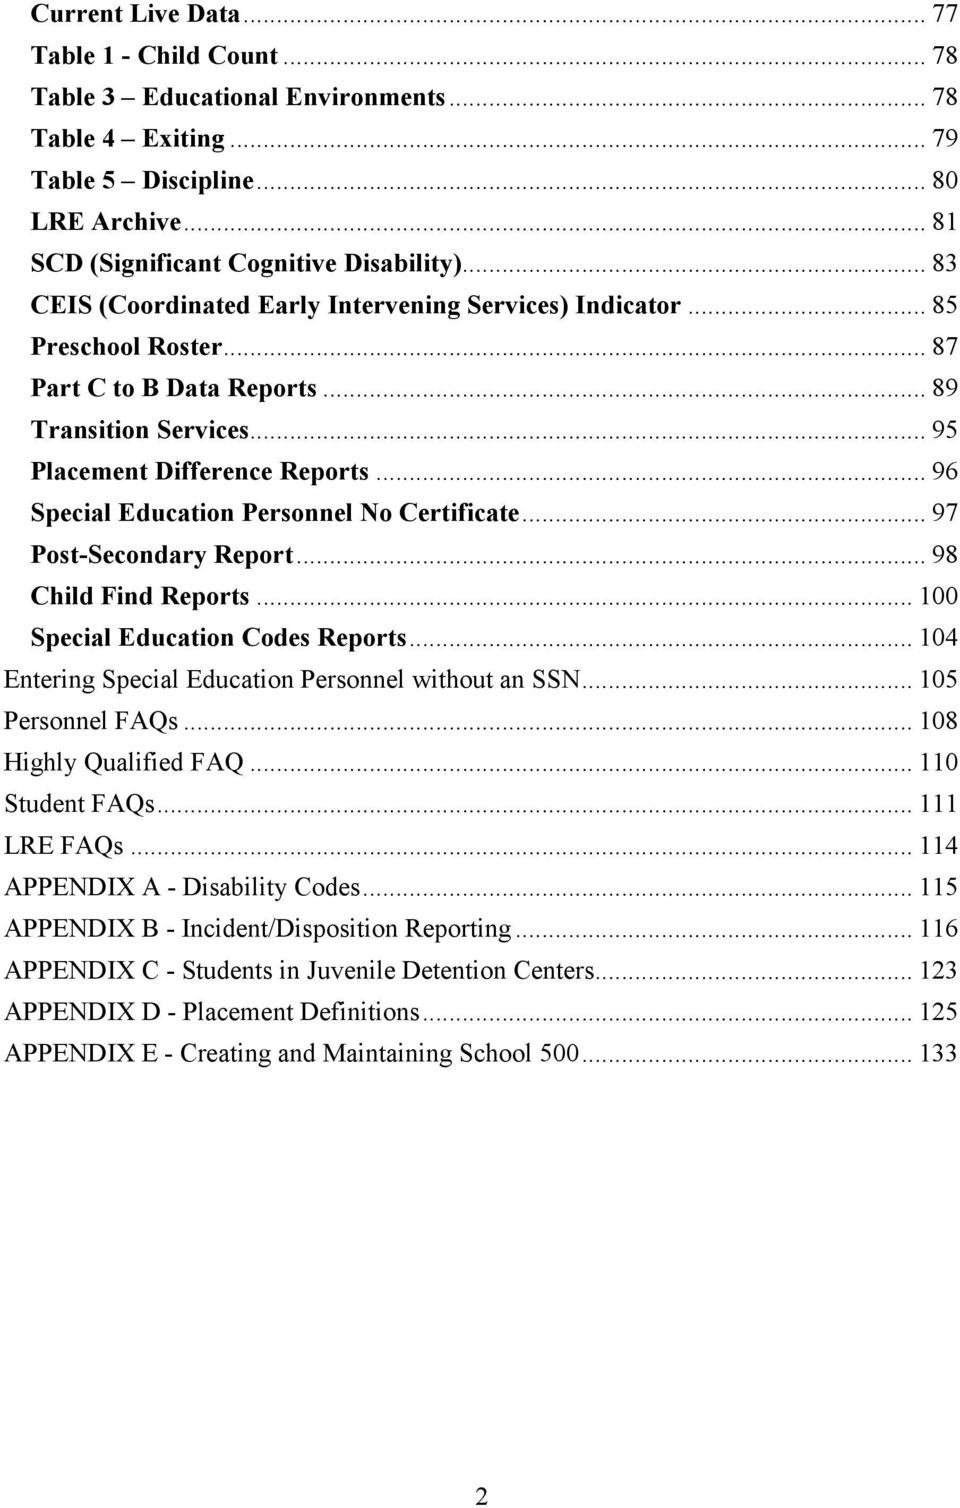 .. 96 Special Education Personnel No Certificate... 97 Post-Secondary Report... 98 Child Find Reports... 100 Special Education Codes Reports... 104 Entering Special Education Personnel without an SSN.